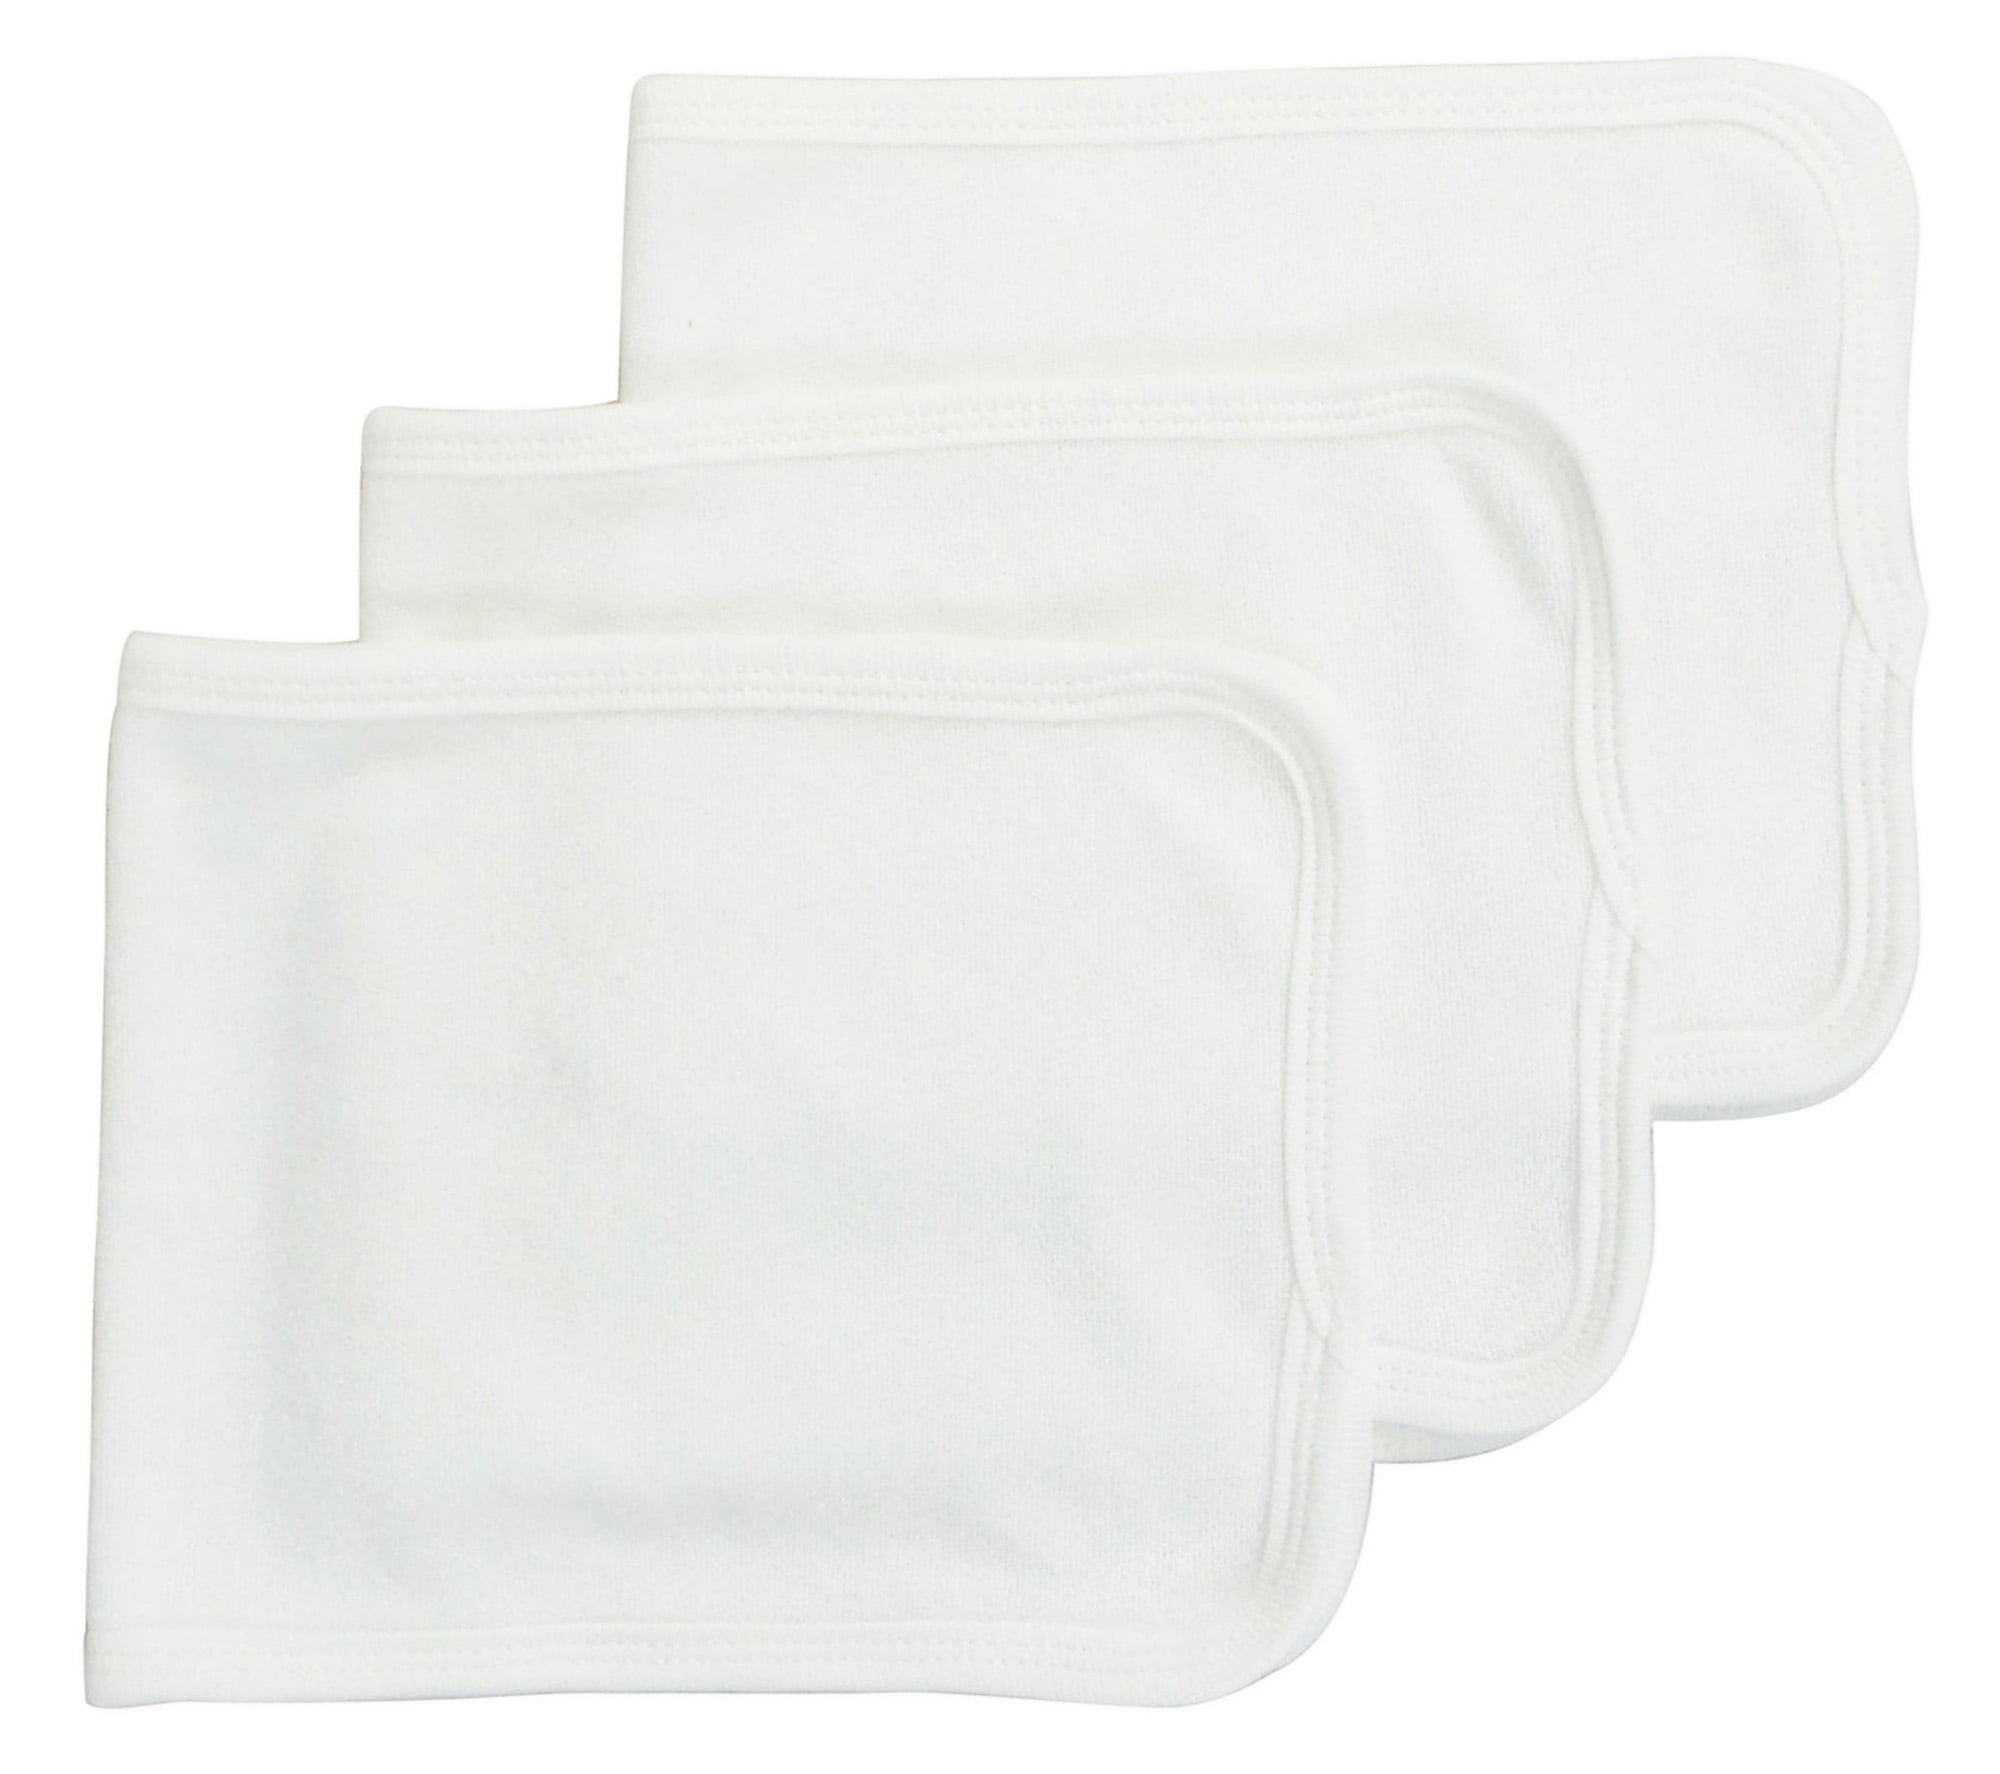 12.25 X 7.5 In. Baby Burpcloth With White Trim - Pack Of 3